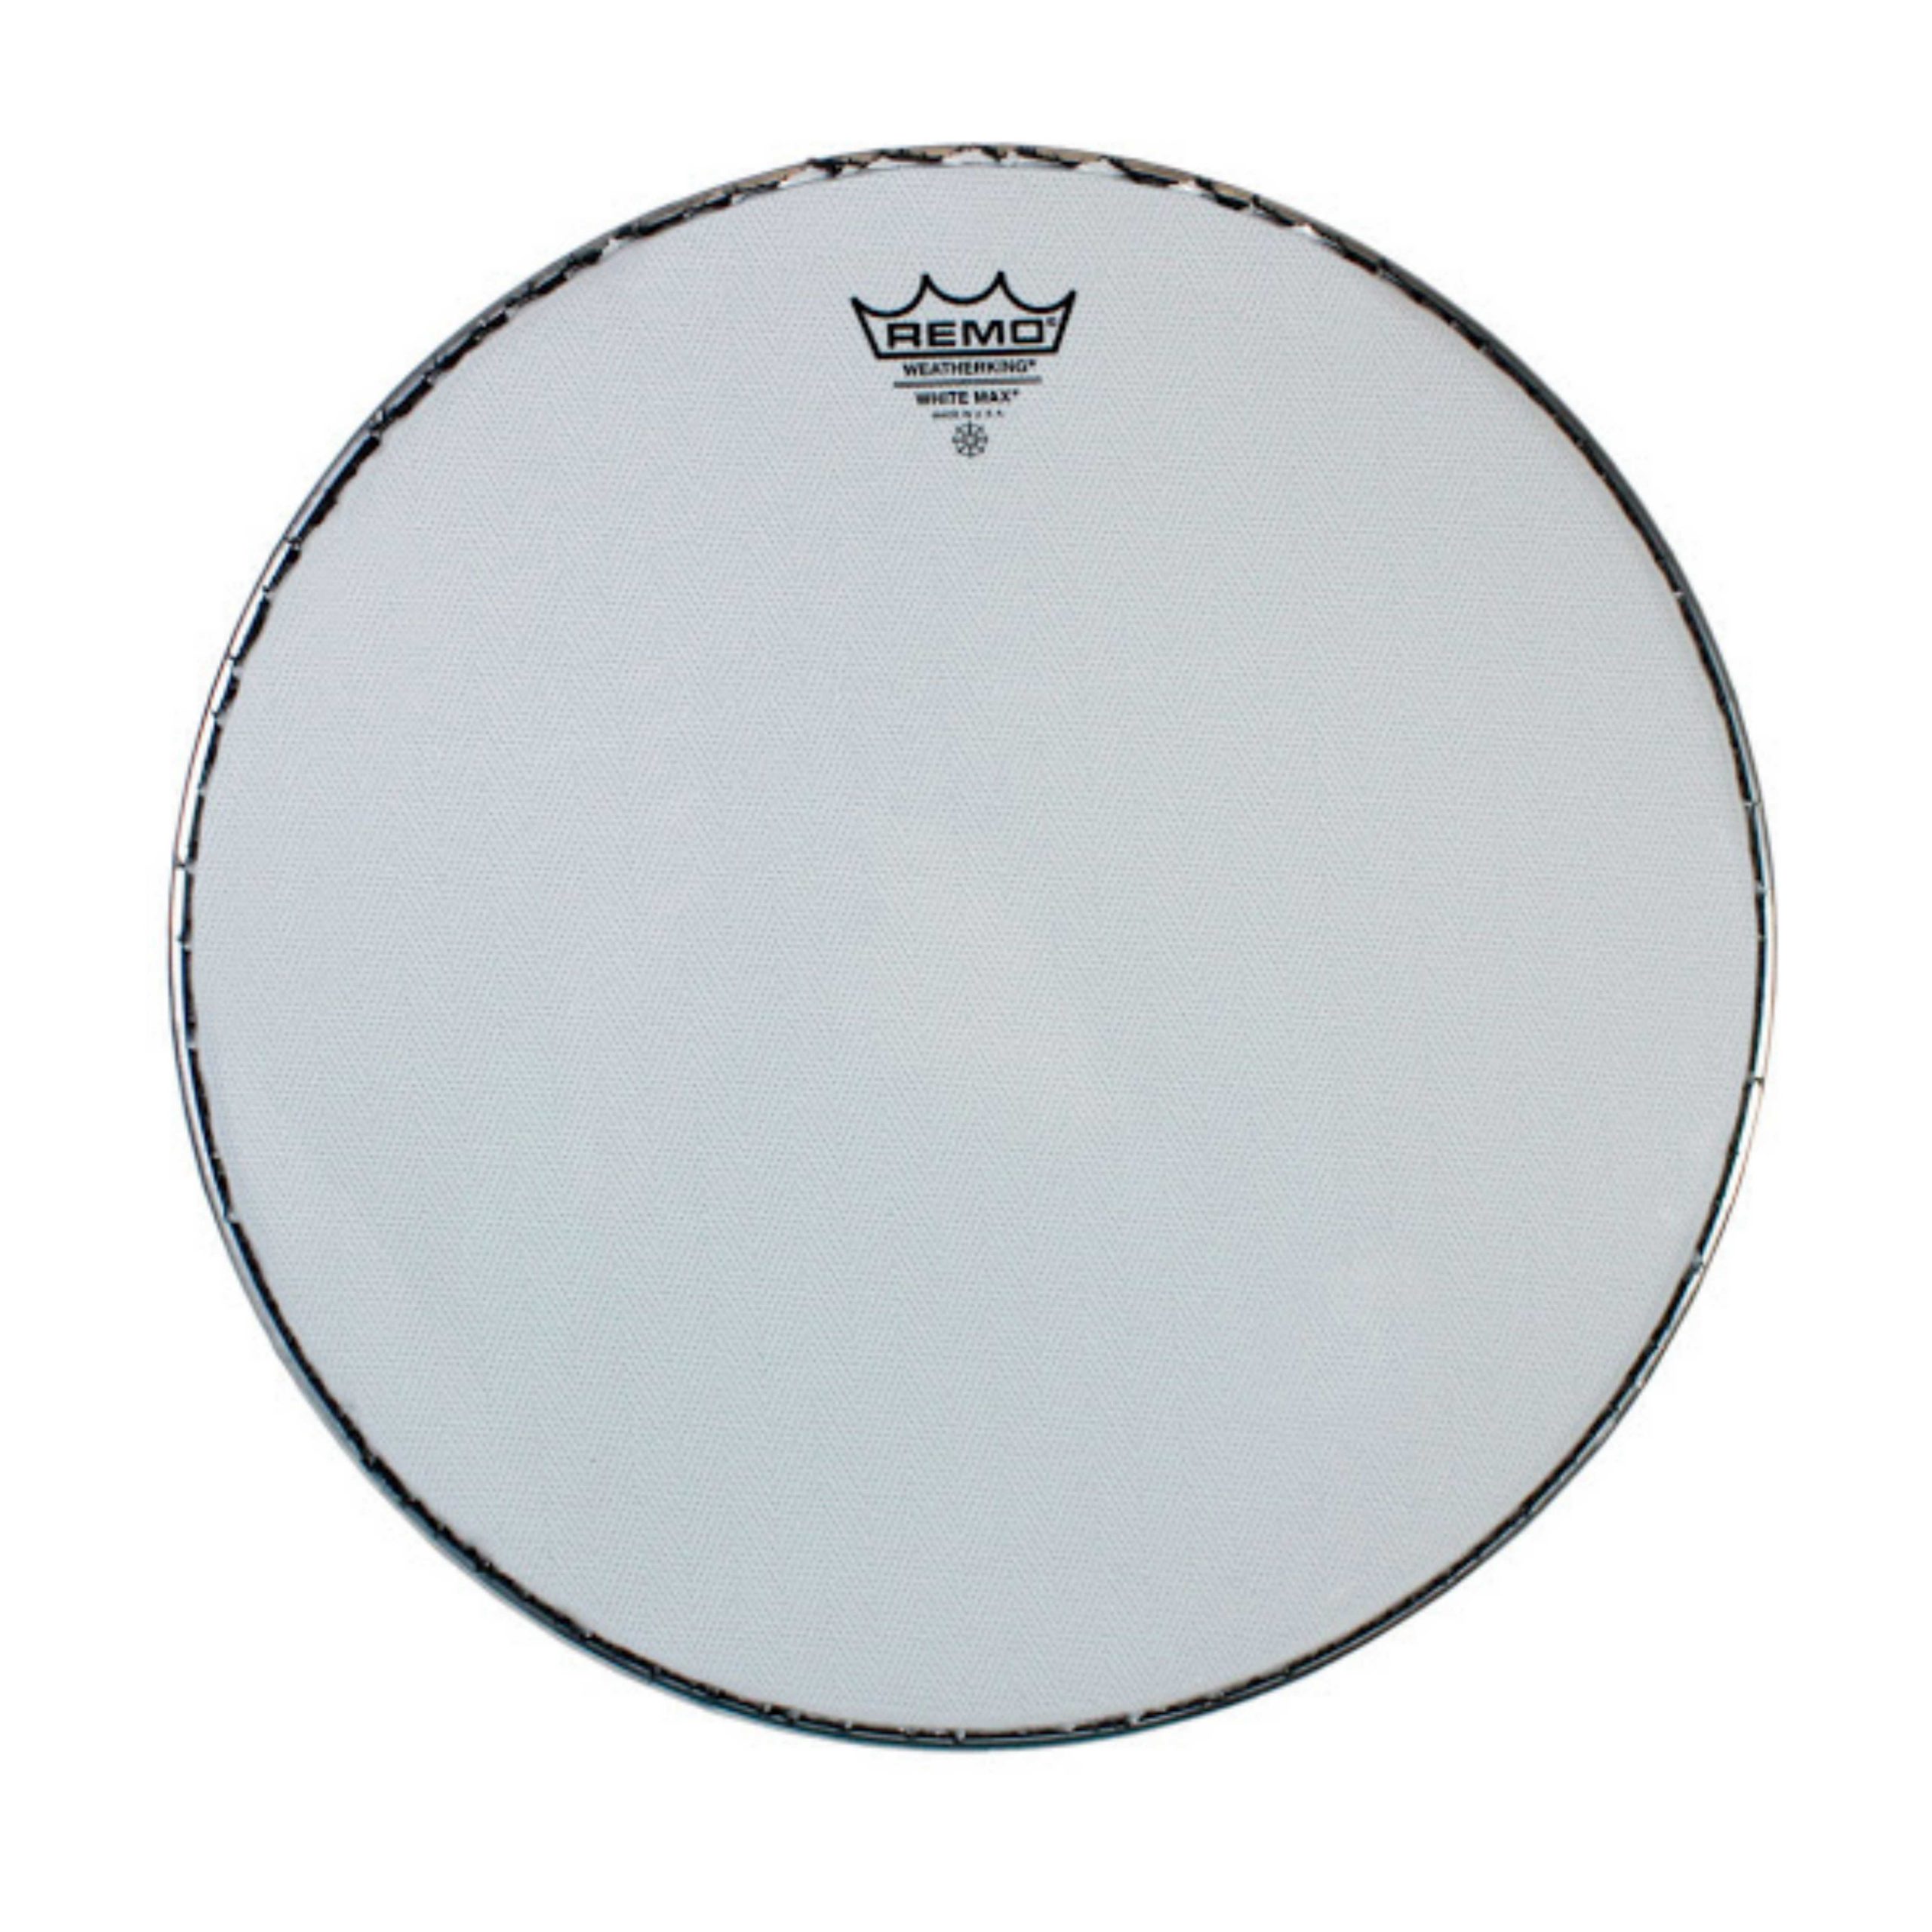 Remo White Max - 12" Marching Snare Drum Head